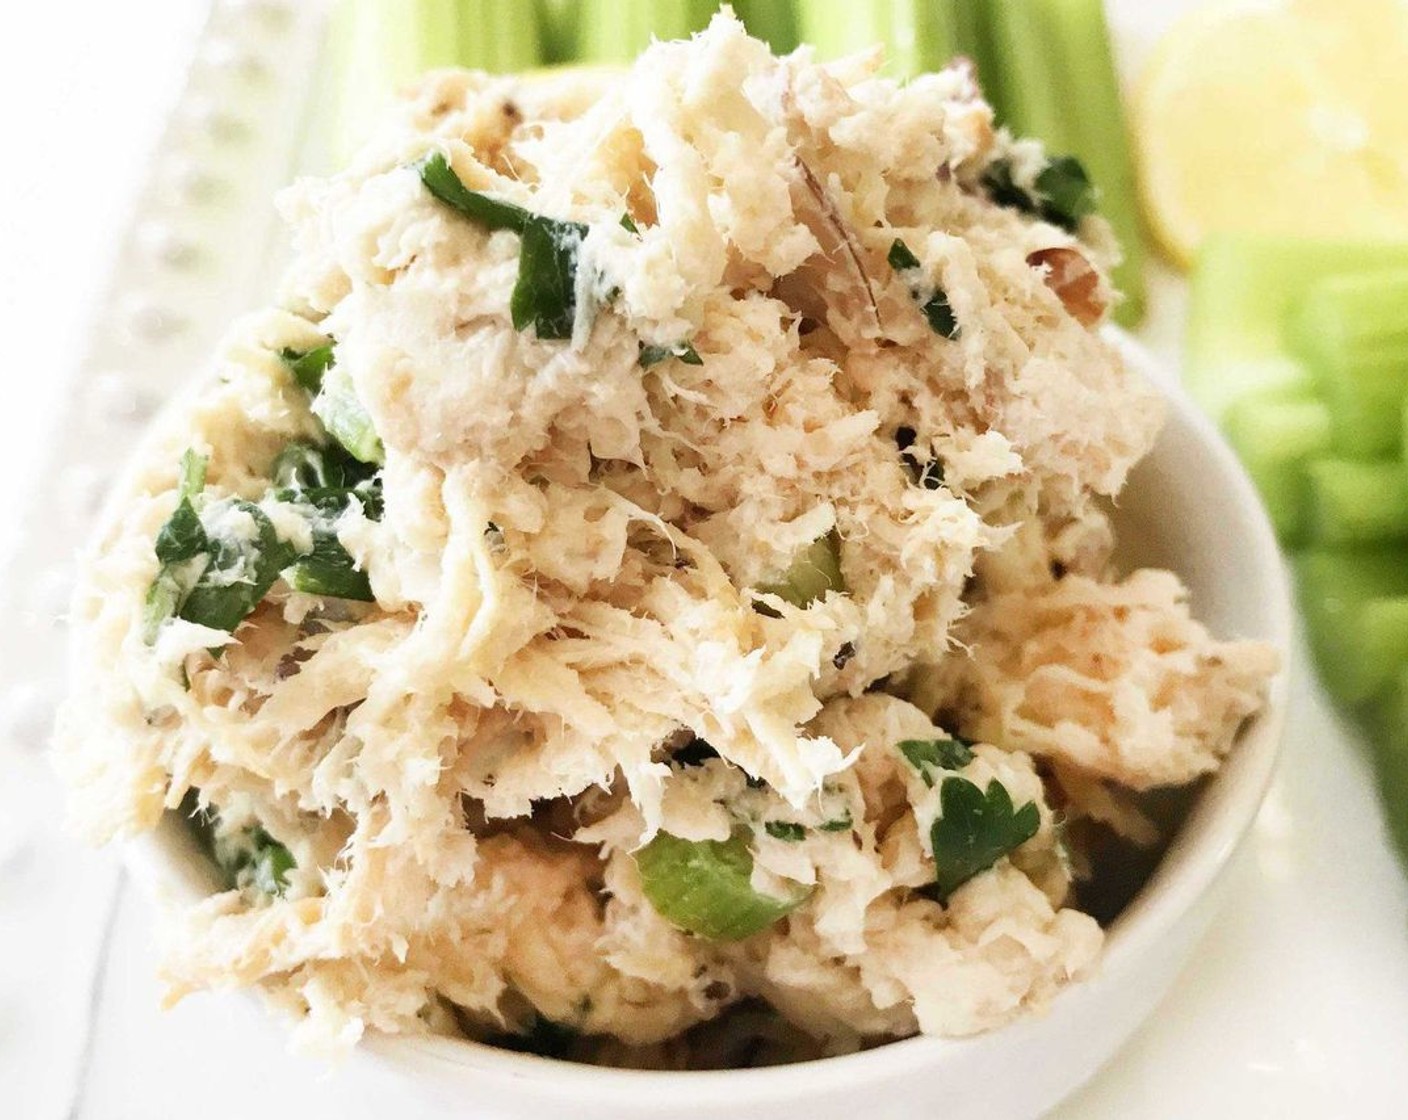 step 5 Place in an air-tight container in the fridge to cool for at least 2 hours or until ready to serve. Store leftovers in an air-tight container in the fridge for 3-5 days. I served mine with celery sticks for a more “resolution friendly” party appetizer!